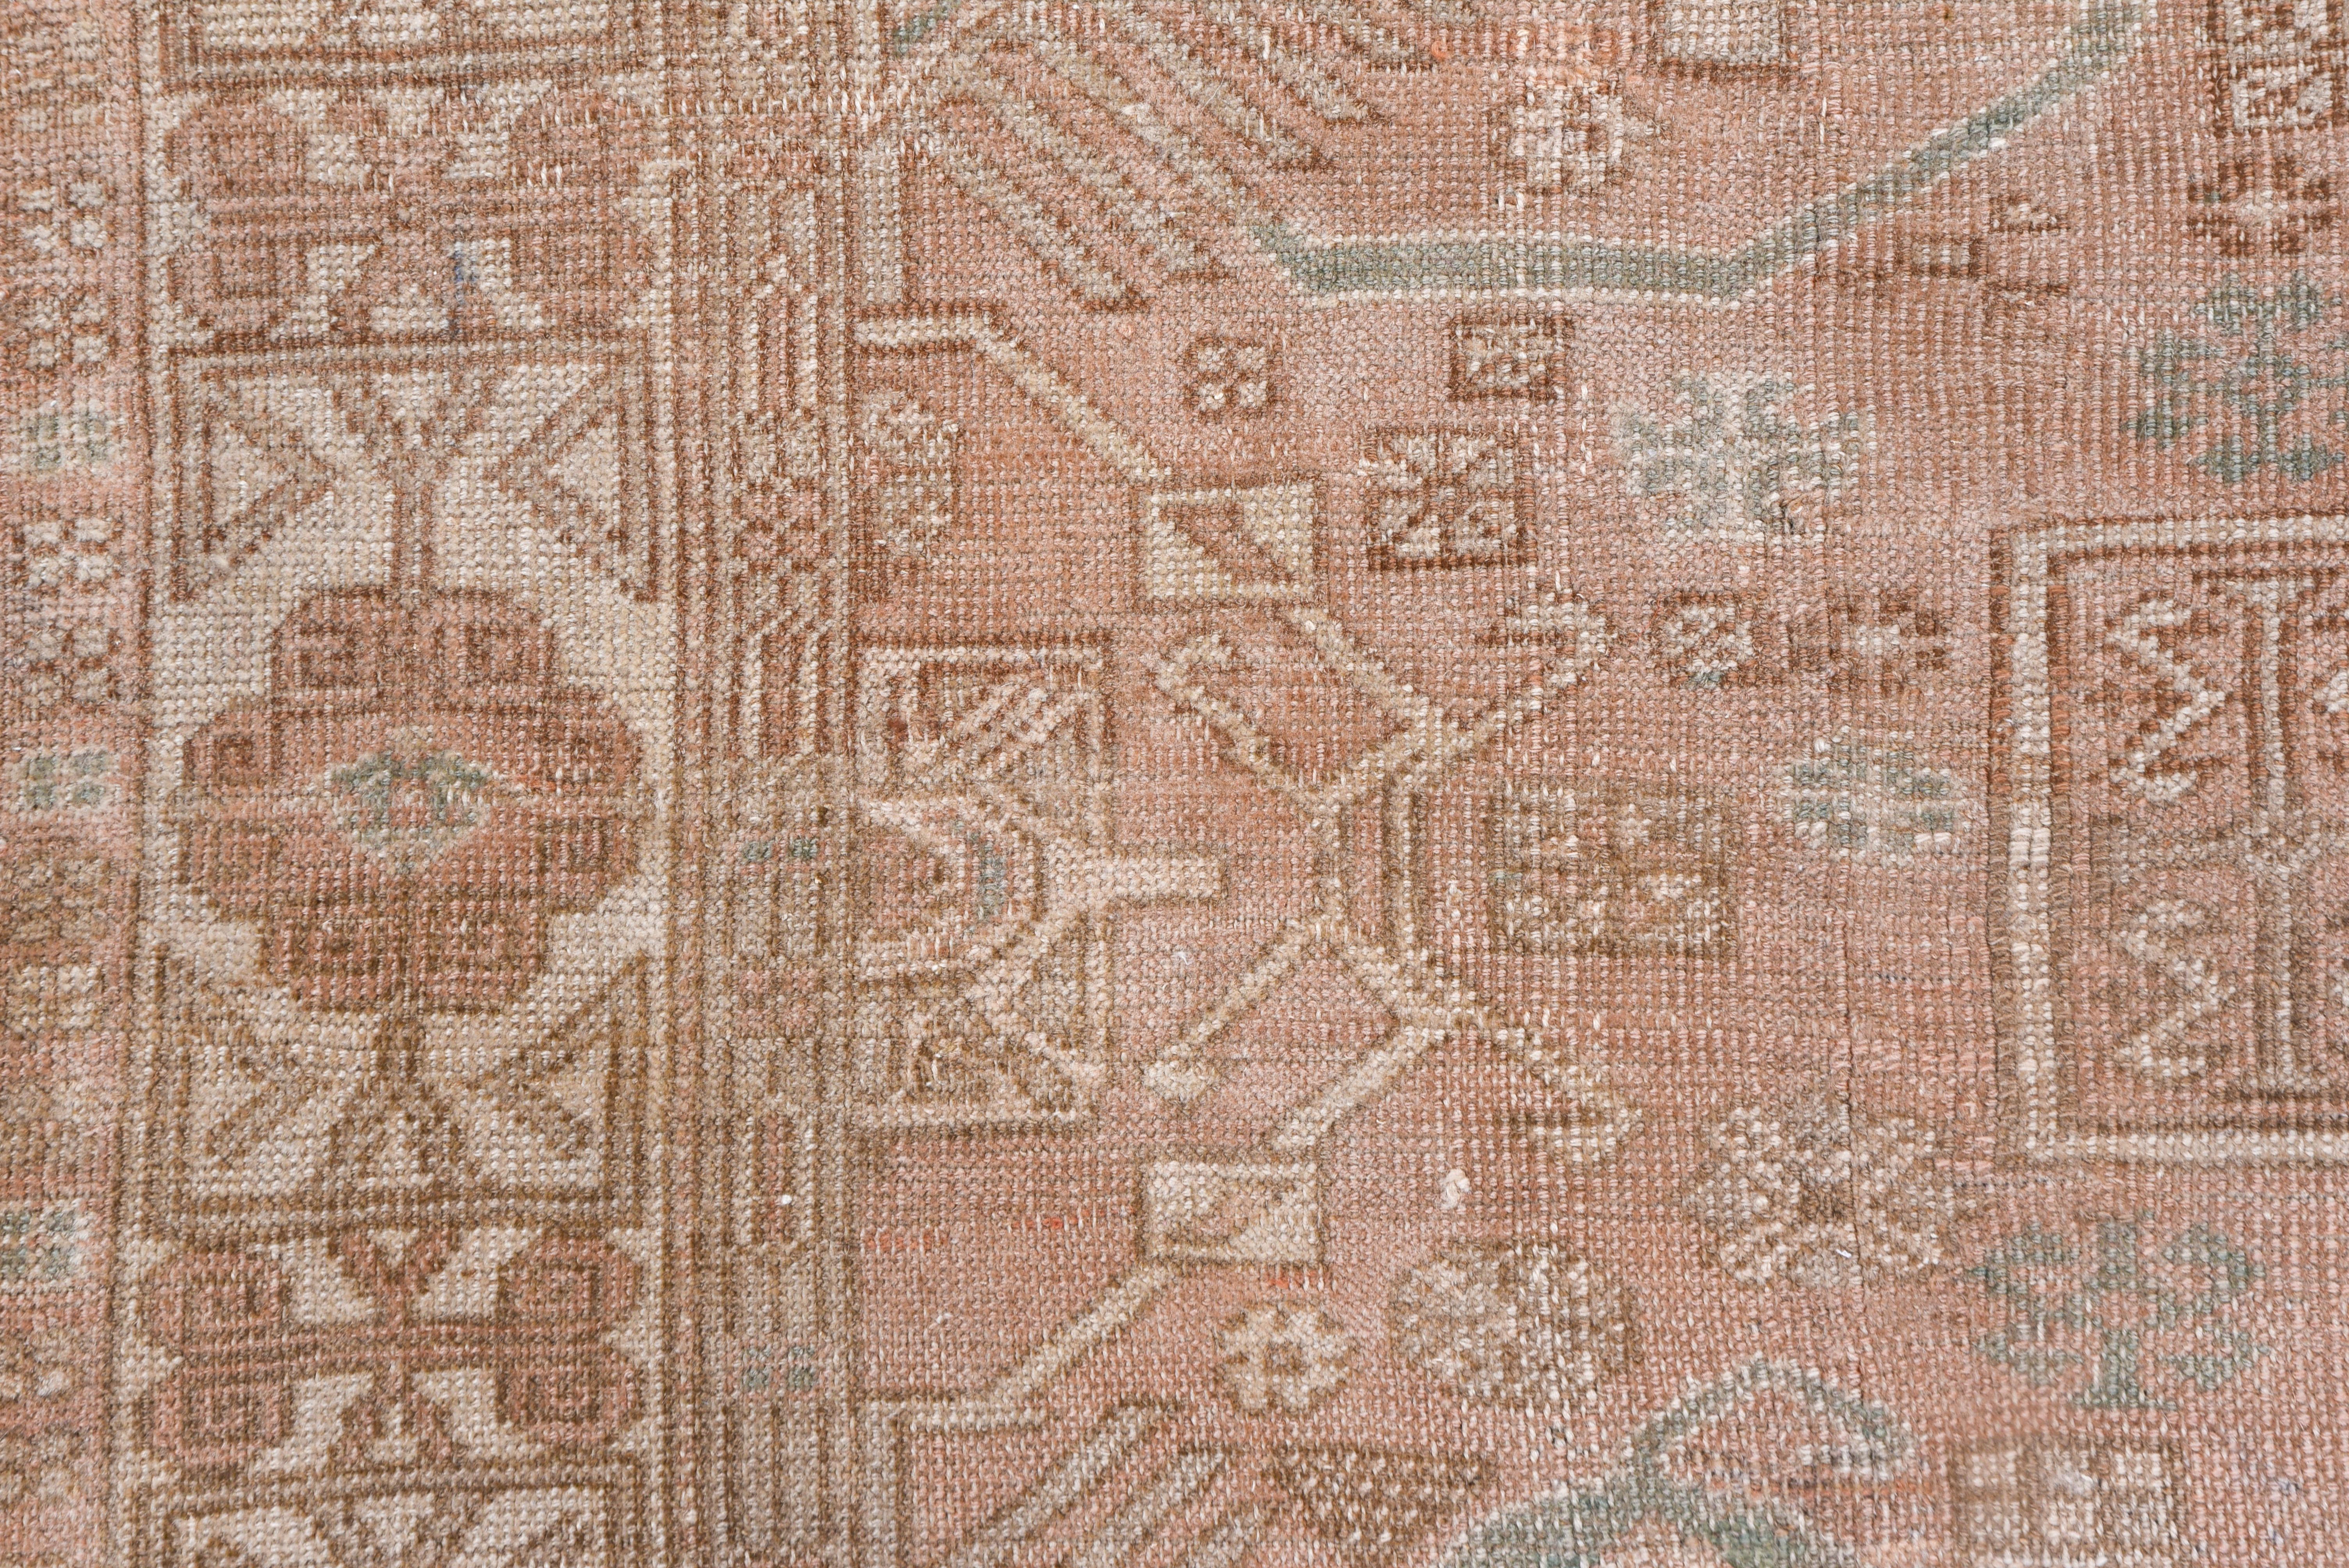 Hand-Knotted Antique Turkish Oushak Carpet, Light Brown Field, circa 1930s For Sale